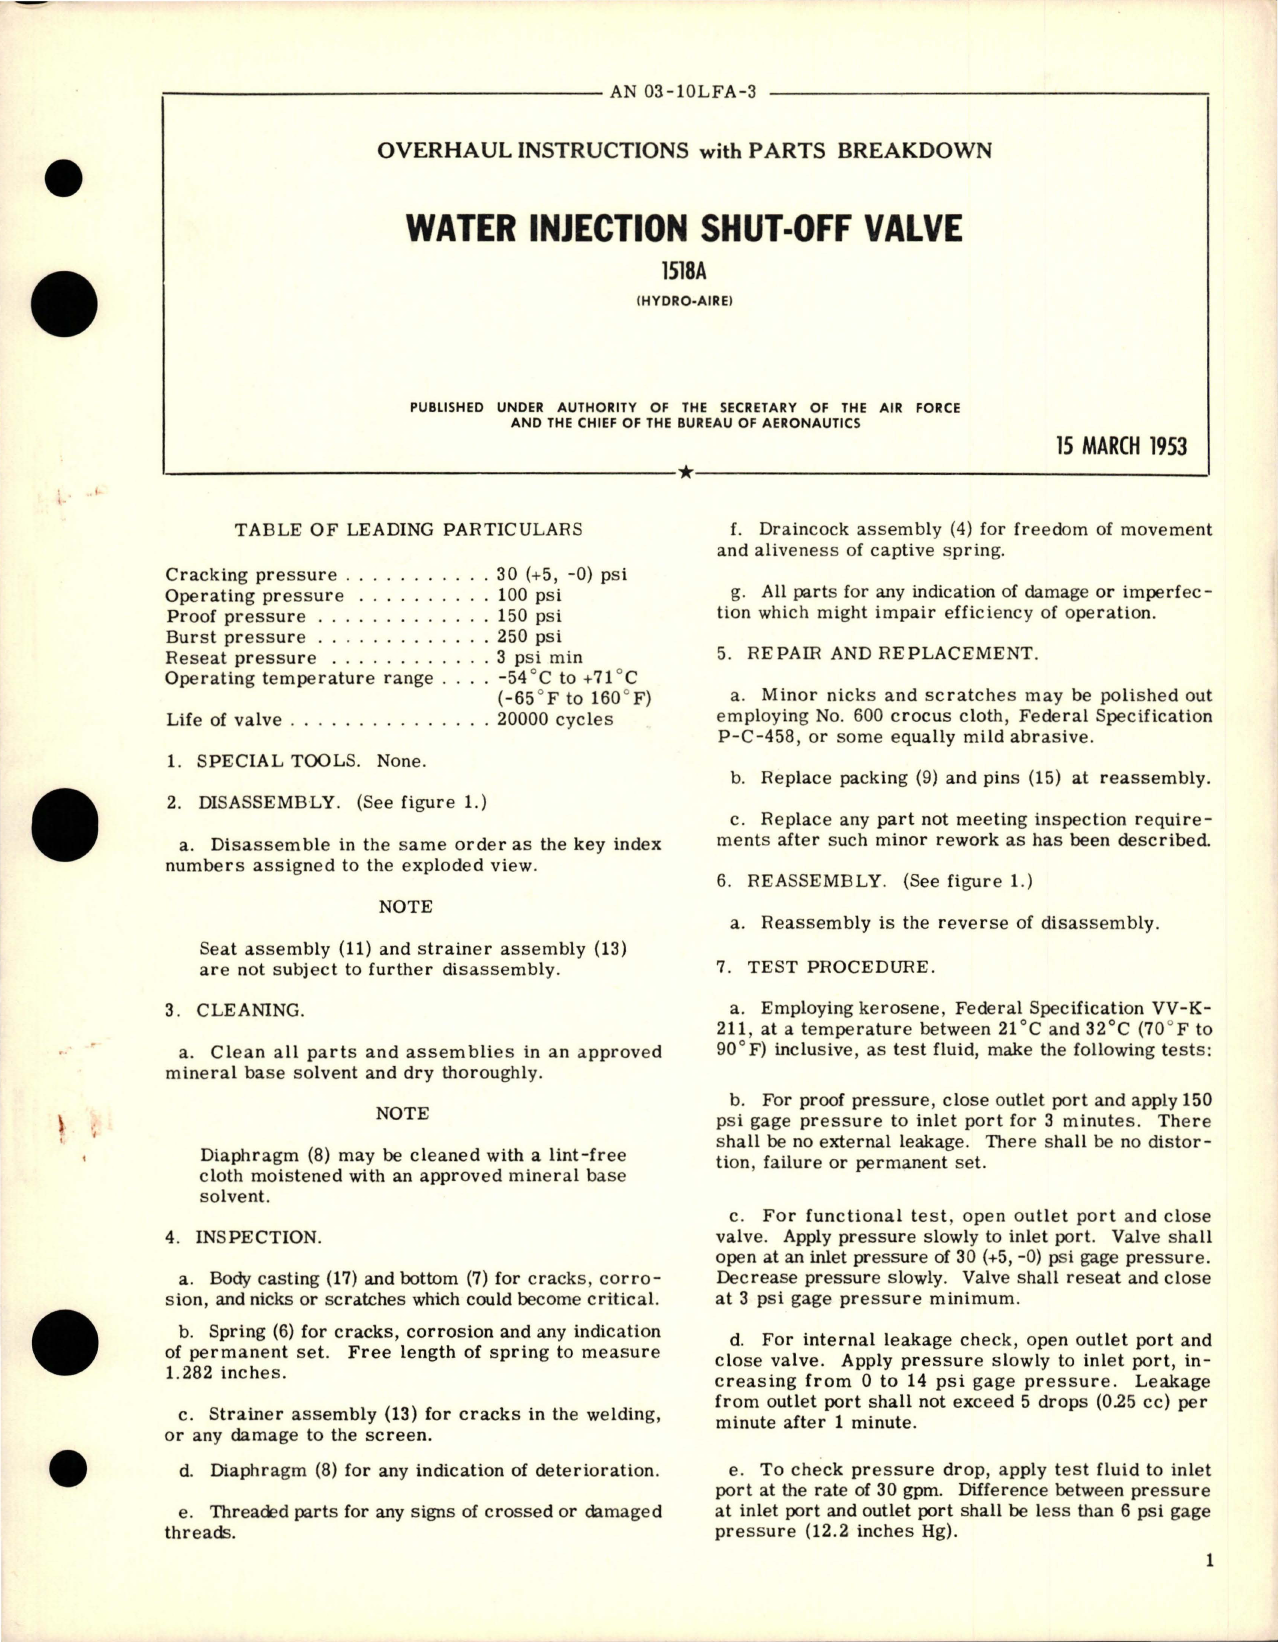 Sample page 1 from AirCorps Library document: Overhaul Instructions with Parts Breakdown for Water Injection Shut Off Valve - 1518A